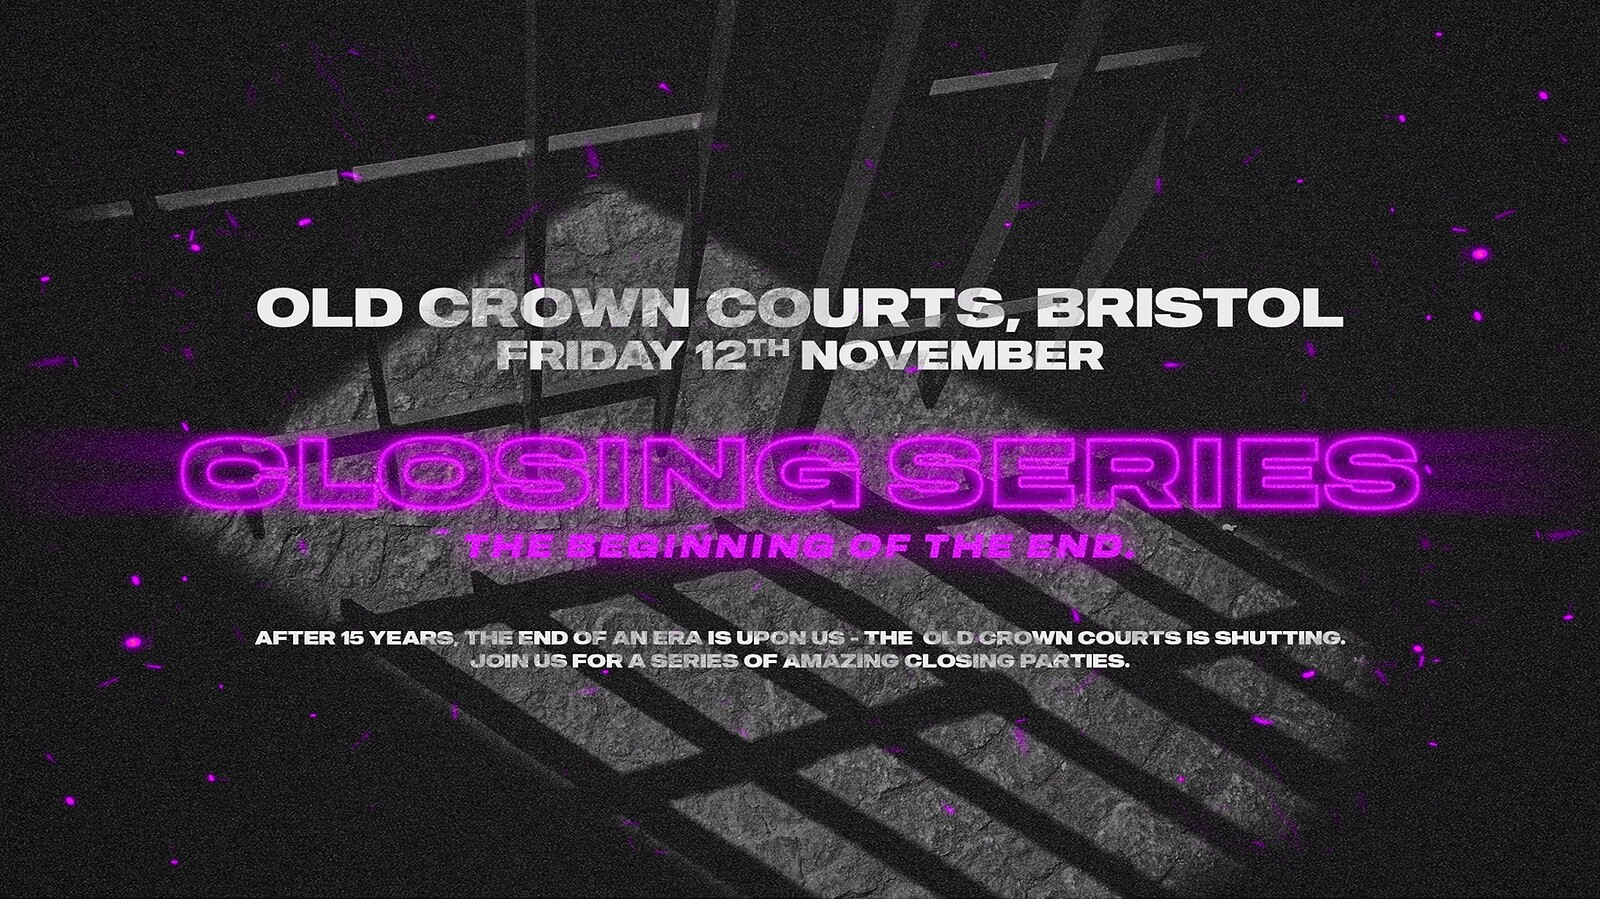 OCC Closing Rave • The Beginning of the End at The Old Crown Courts